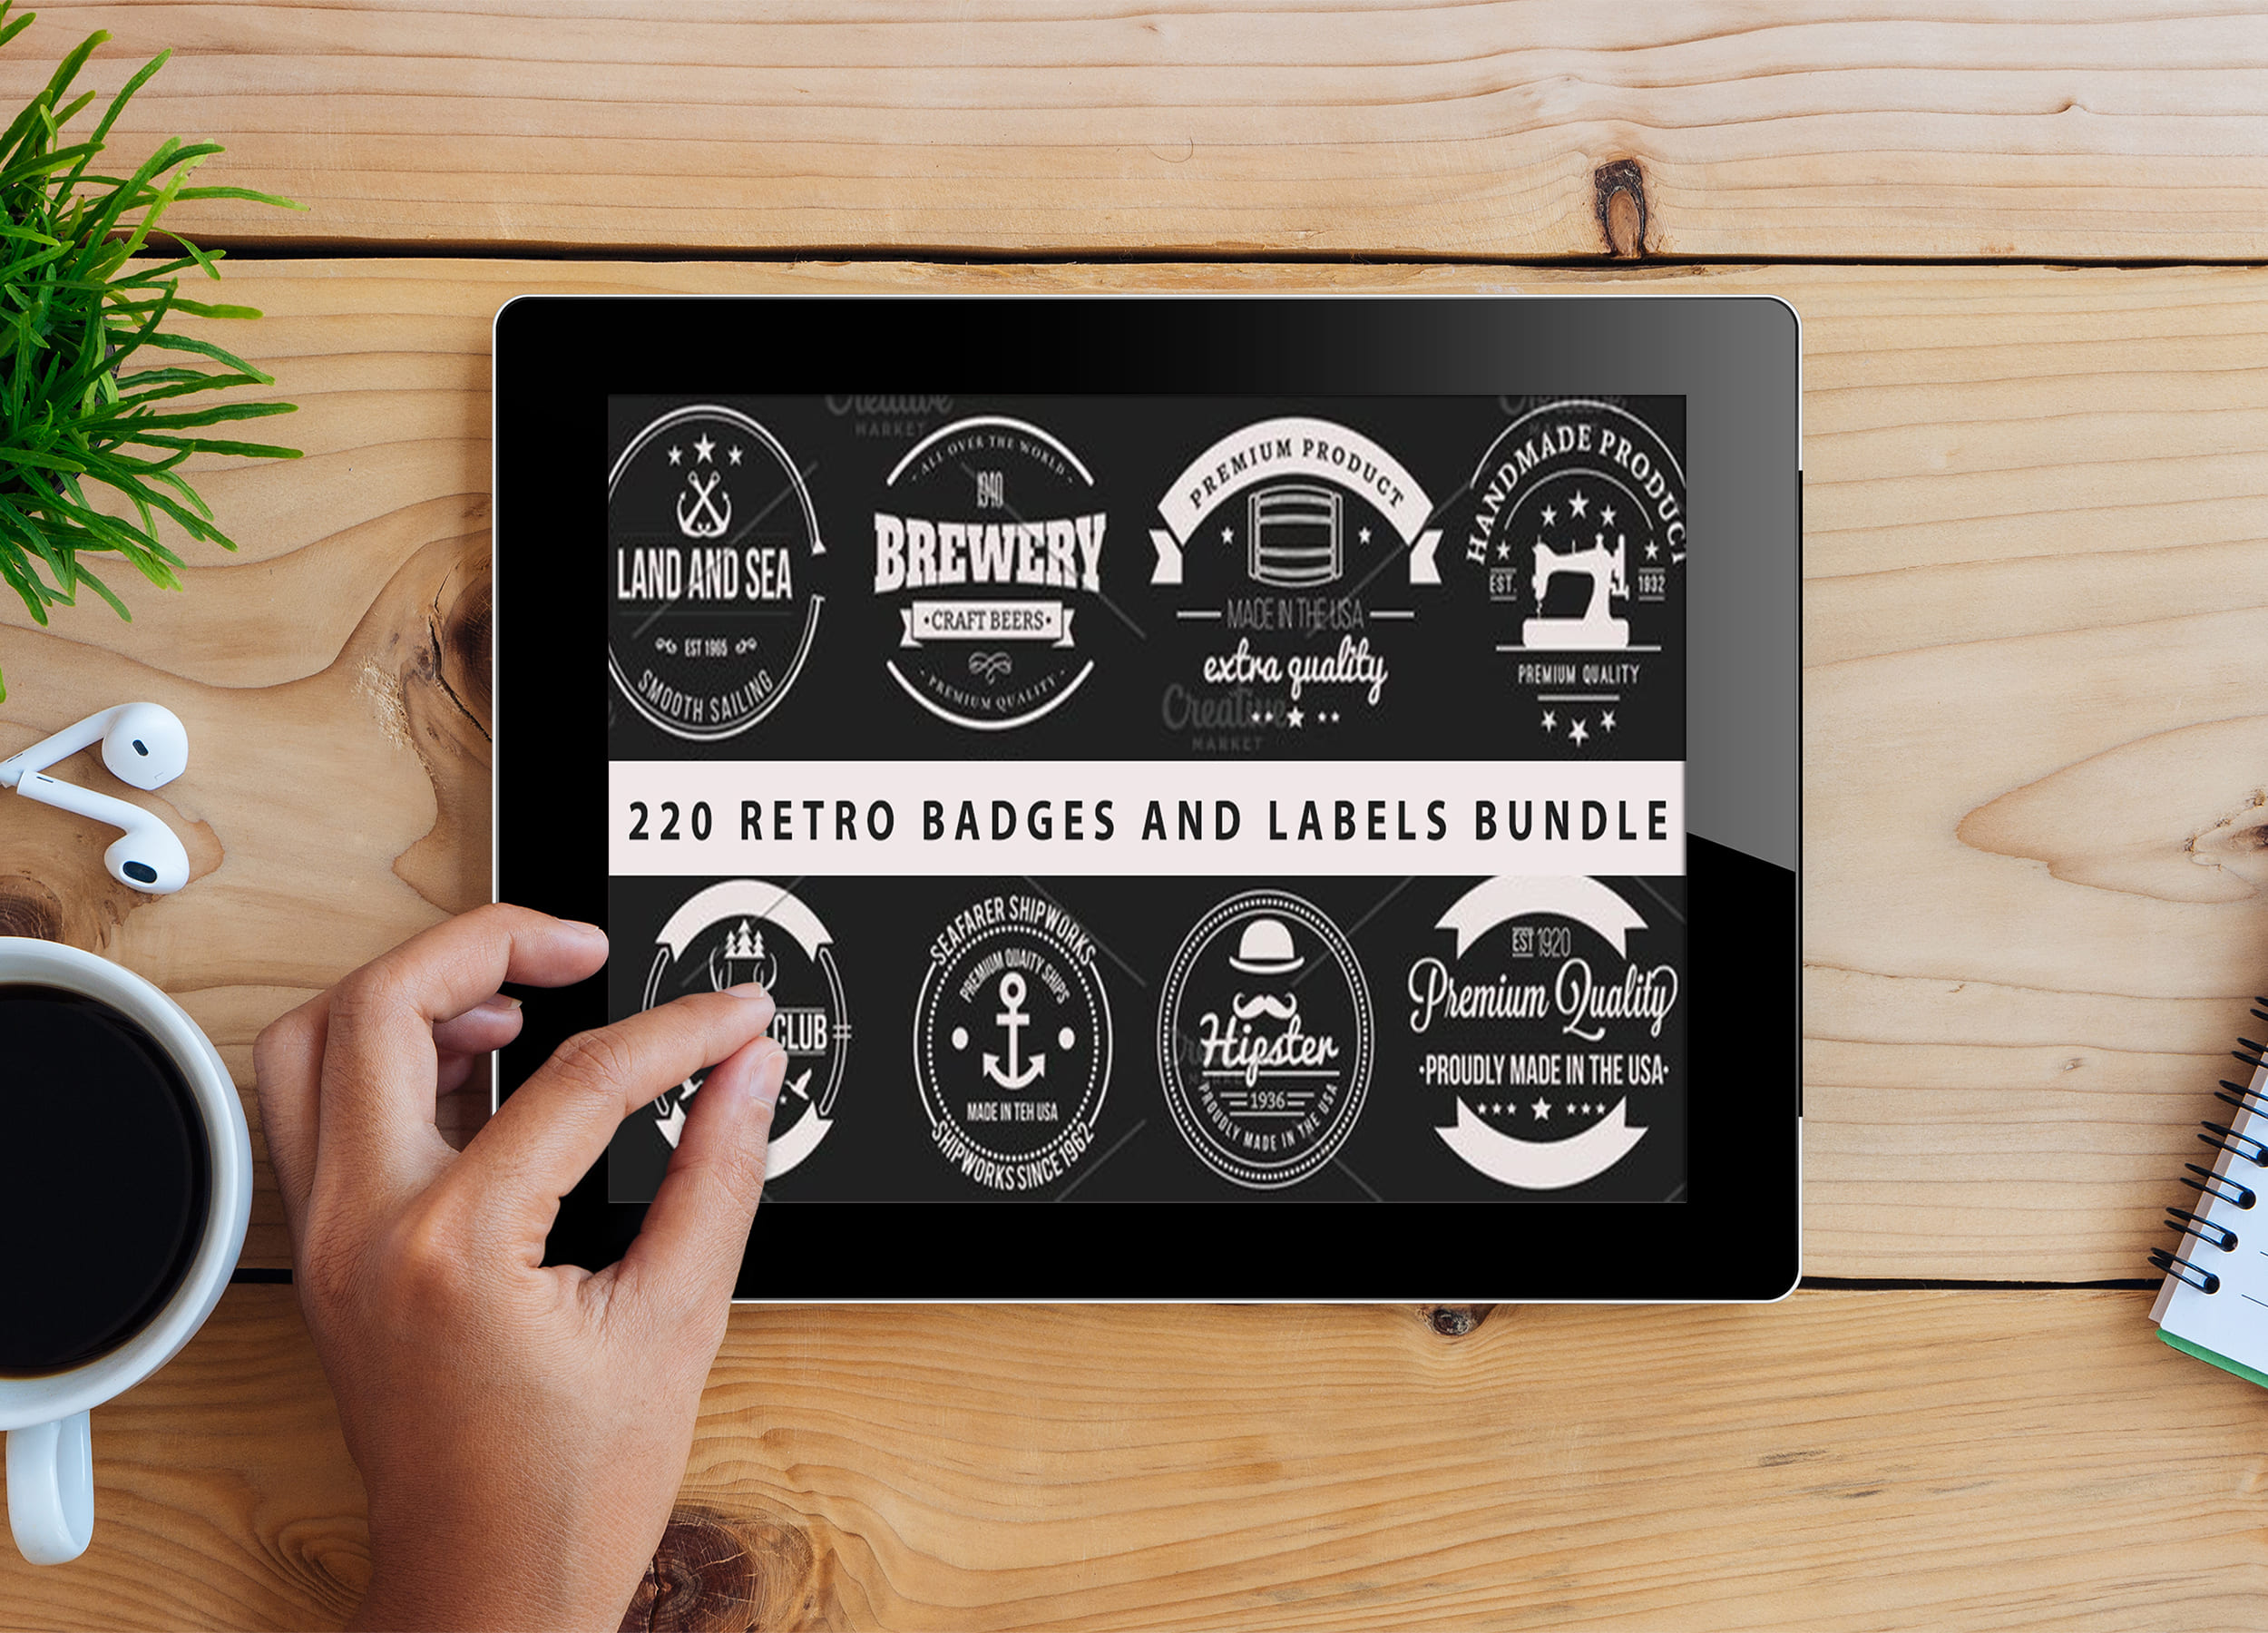 Tablet option of the 220 Retro Badges and Labels Bundle.